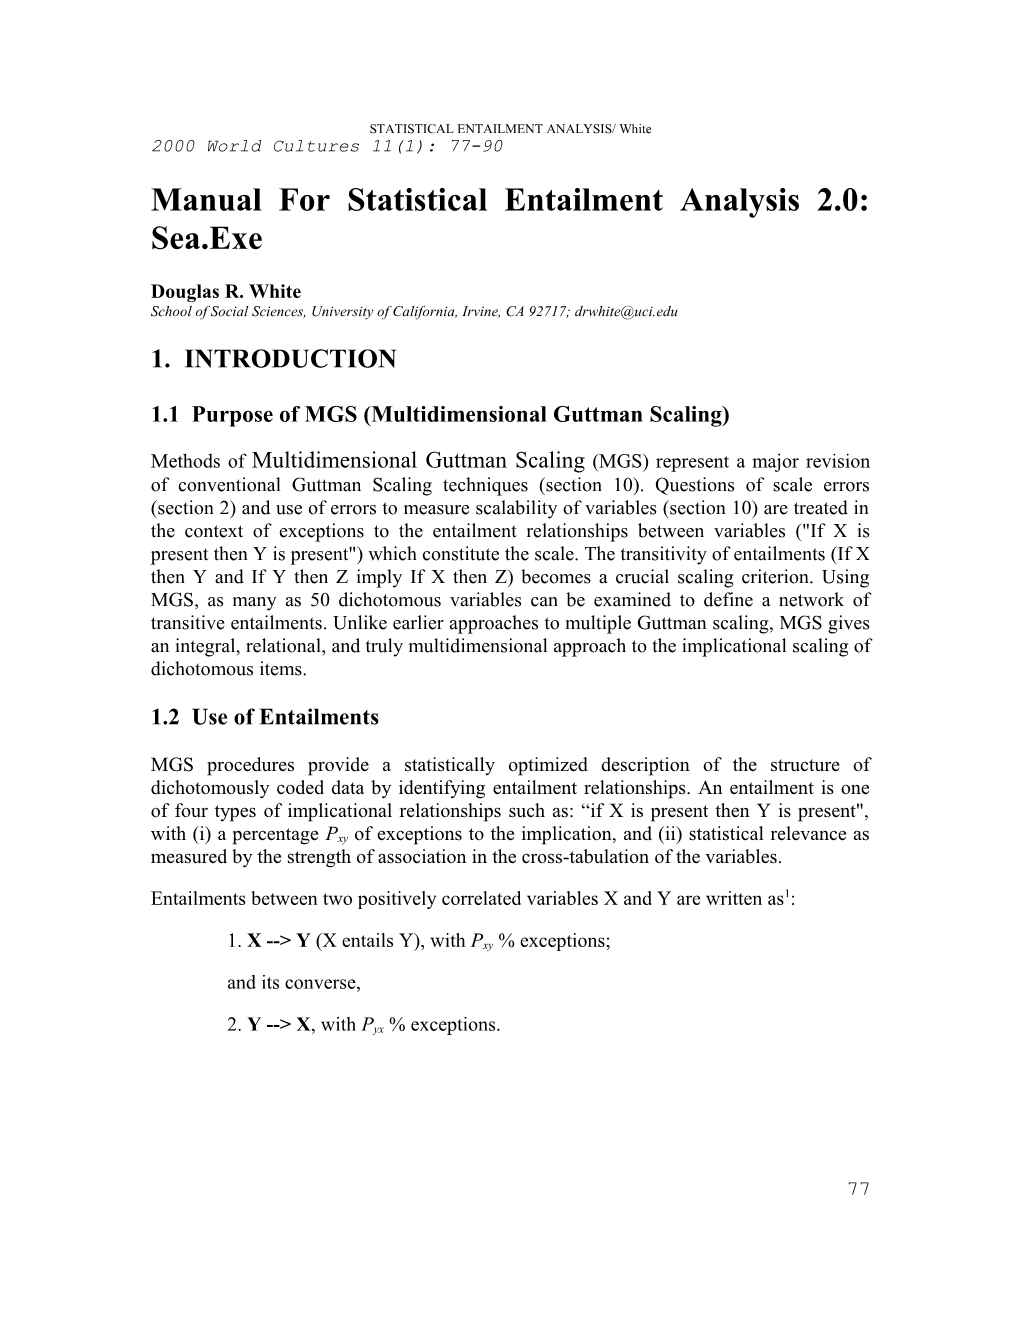 Manual for Statistical Entailment Analysis 2.0: Sea.Exe